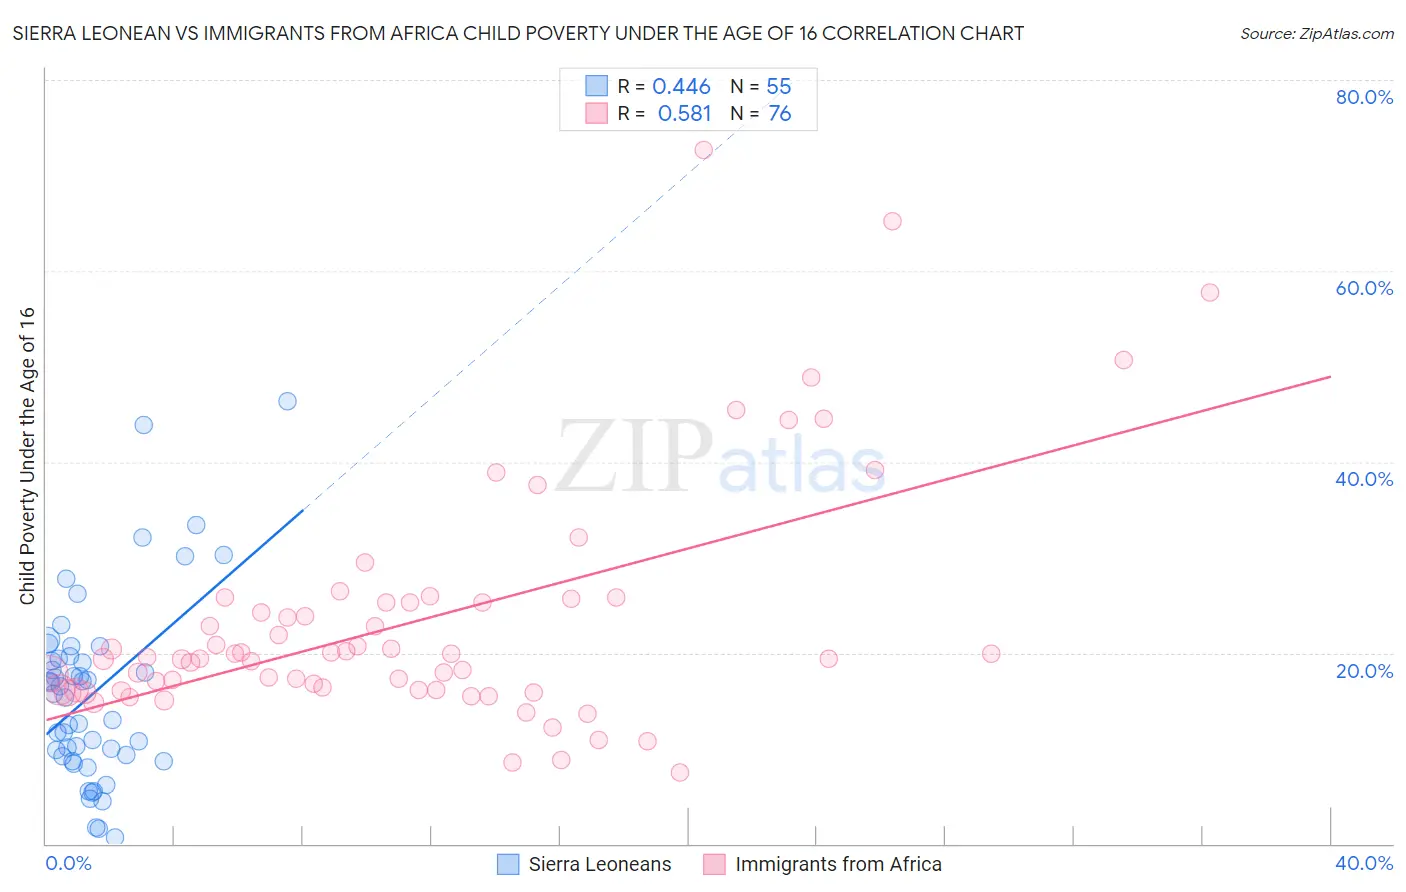 Sierra Leonean vs Immigrants from Africa Child Poverty Under the Age of 16